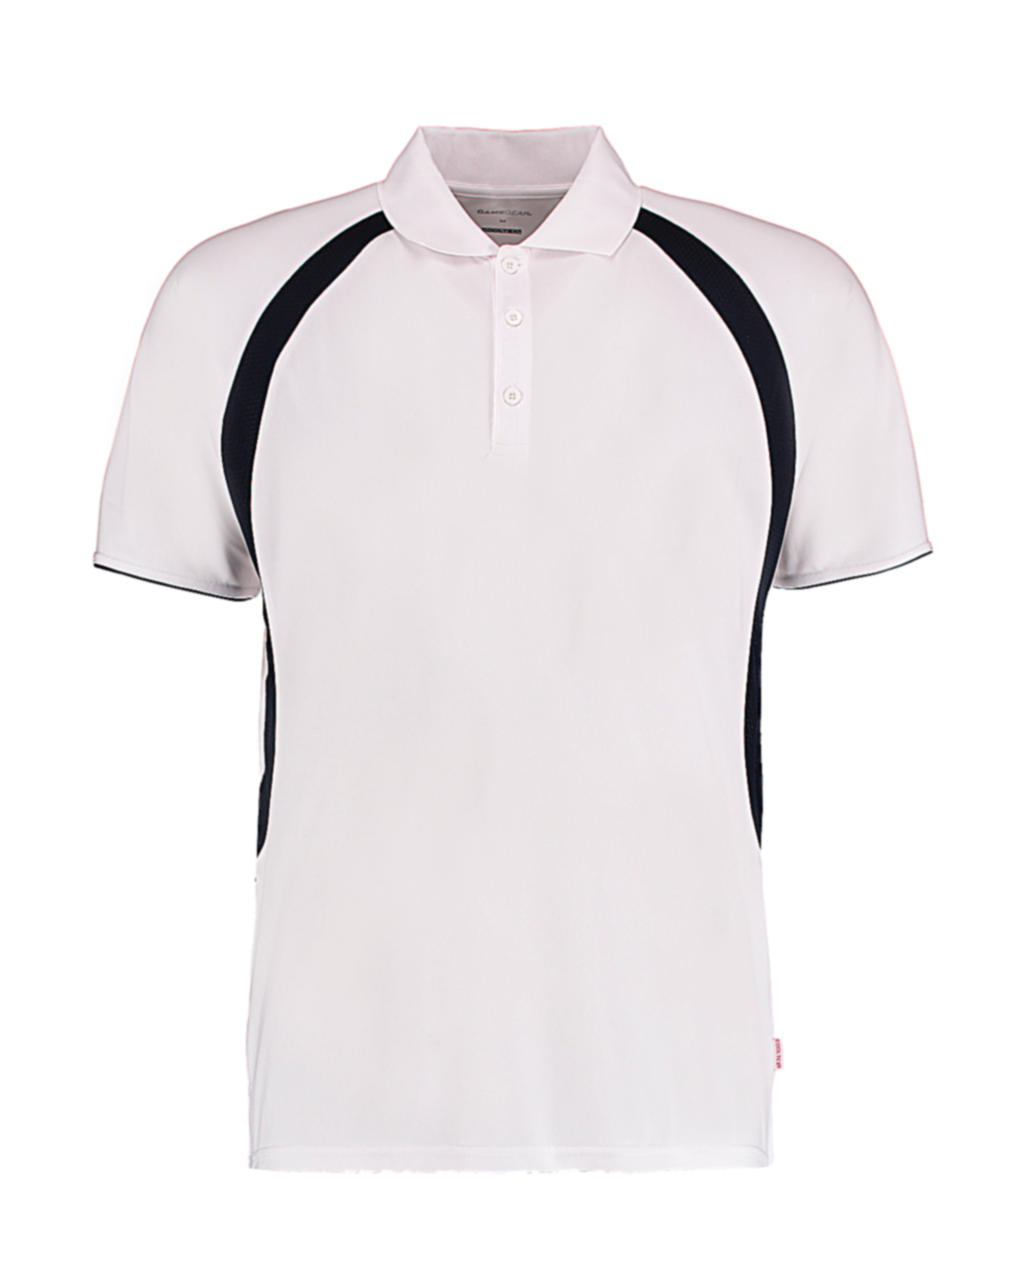 550.11 / Classic Fit Cooltex® Riviera Polo Shirt